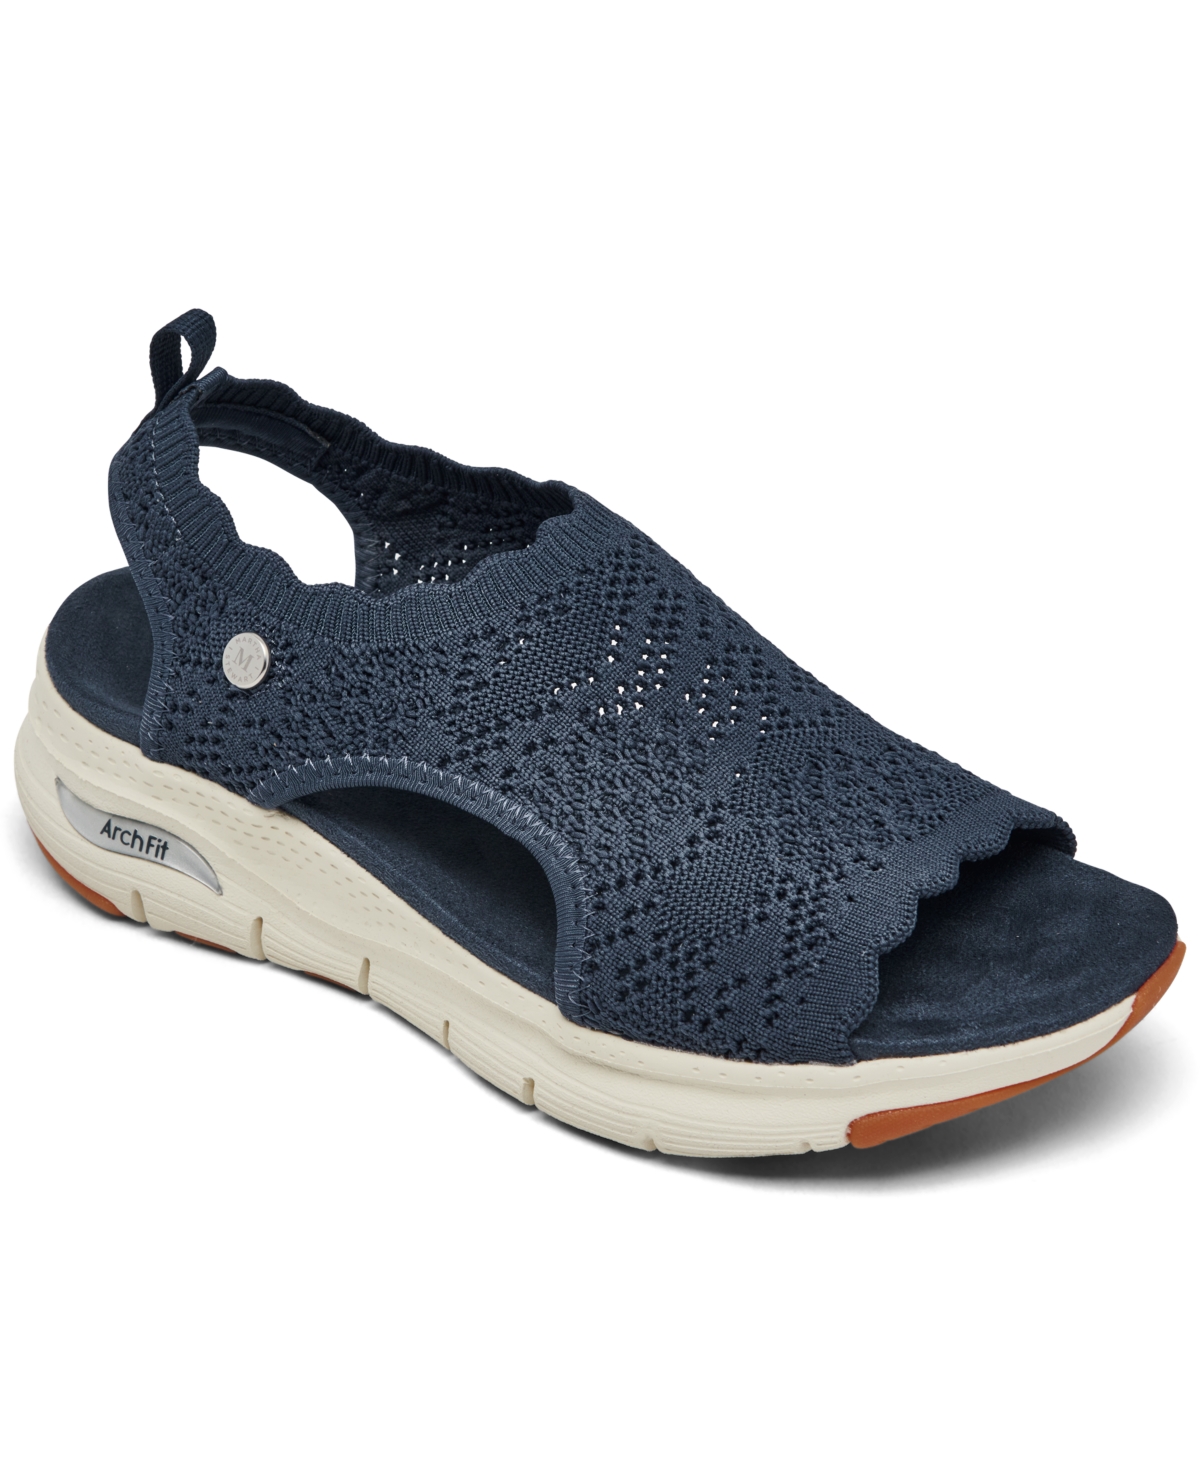 Cali Women's Martha Stewart: Arch Fit - Breezy City Catch Athletic Sandals from Finish Line - NAVY